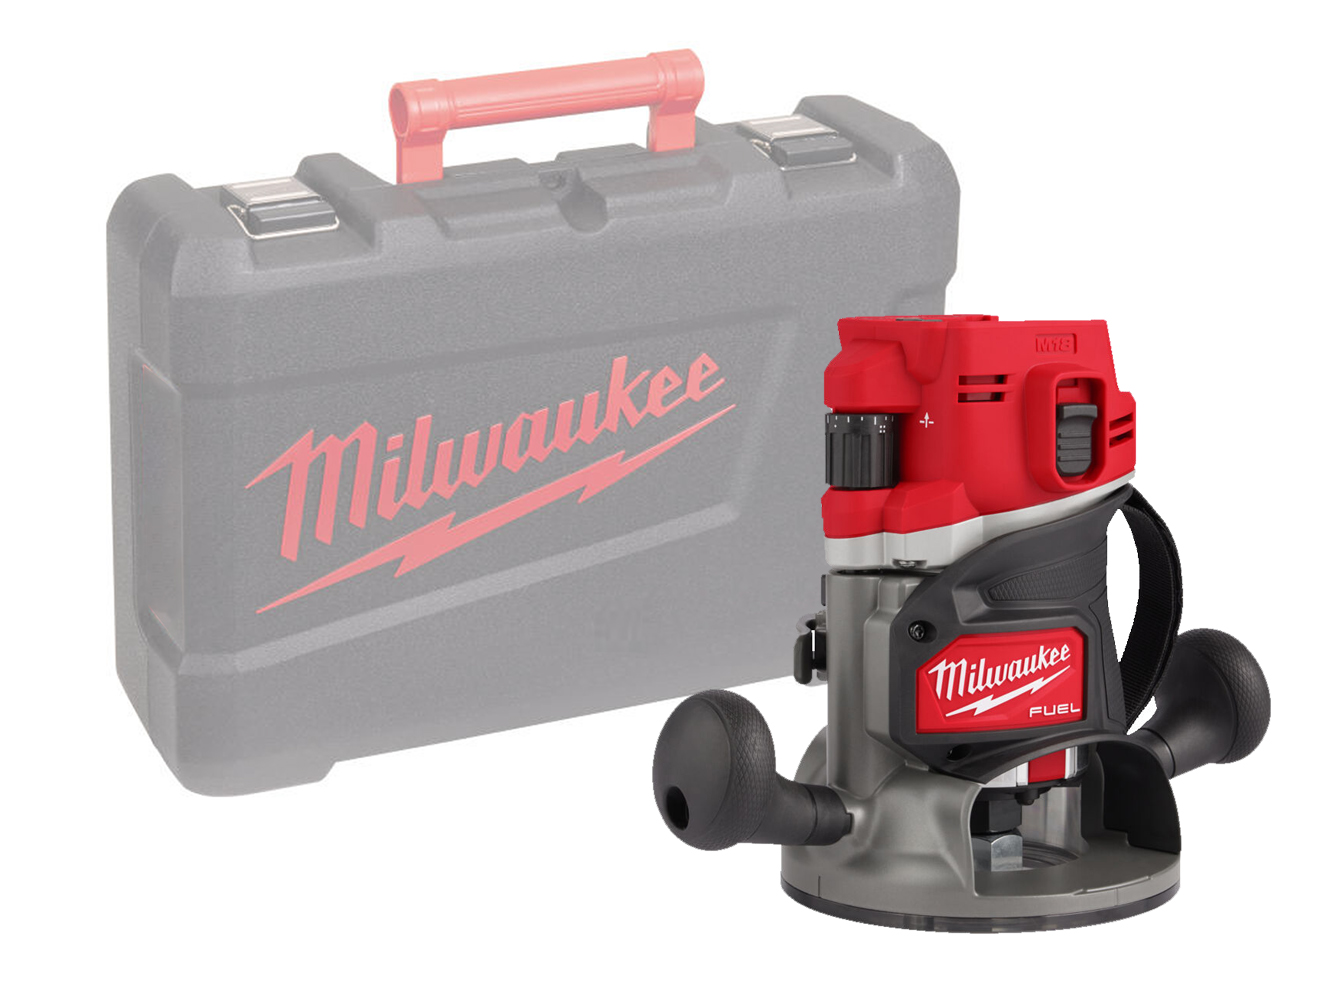 Milwaukee 18v Fuel Brushless 1/2" Router / Trimmer - M18FR12-0X - Body Only